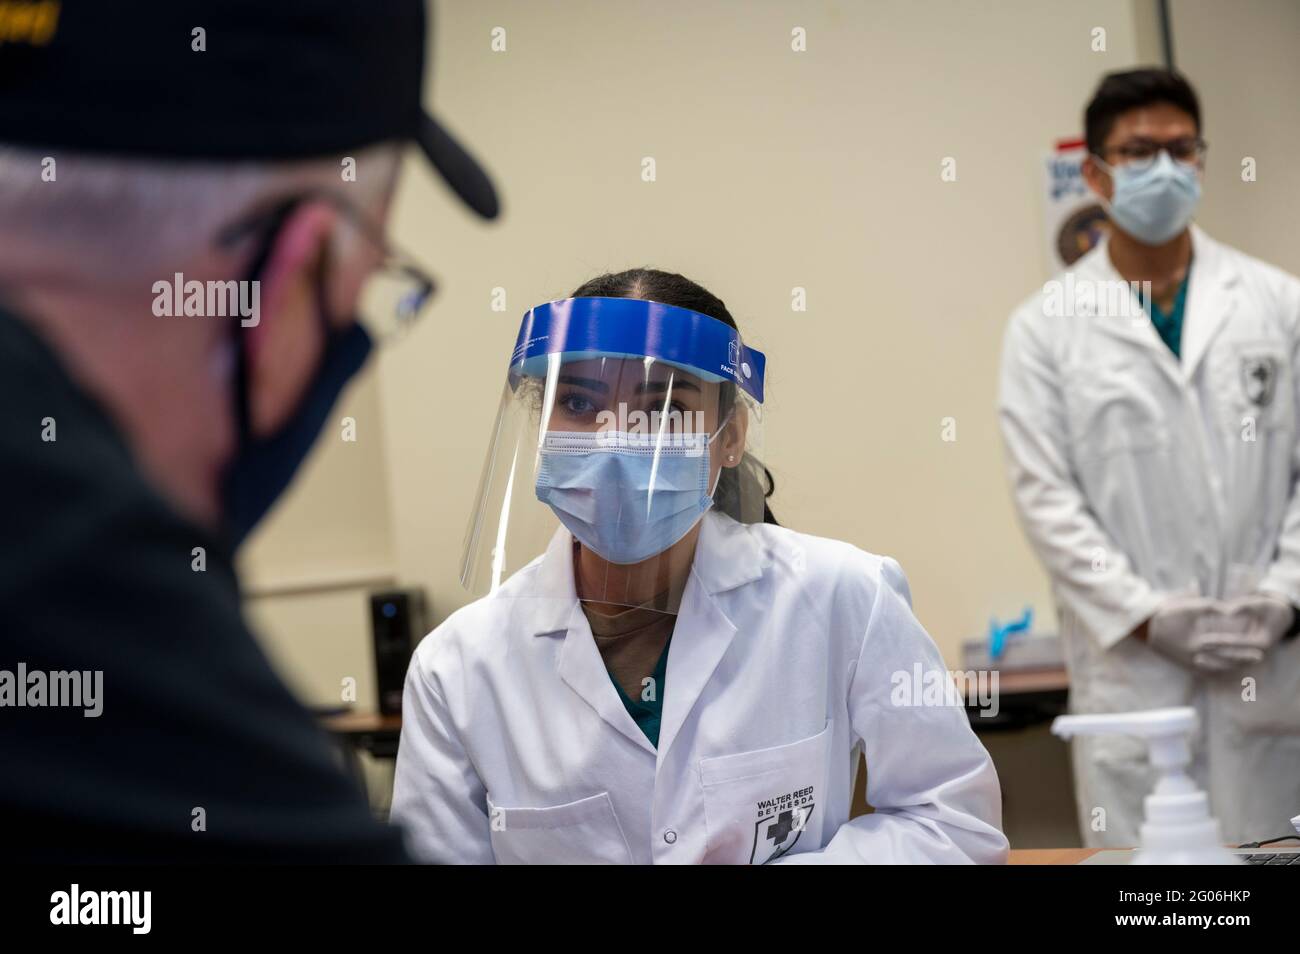 Reportage:  Acting Defense Secretary Chris Miller talks with Navy Hospitalman Samantha Alvarez, after she administered a COVID-19 vaccine to him, Walter Reed National Military Medical Center, Bethesda, Md., Dec. 14, 2020. Stock Photo